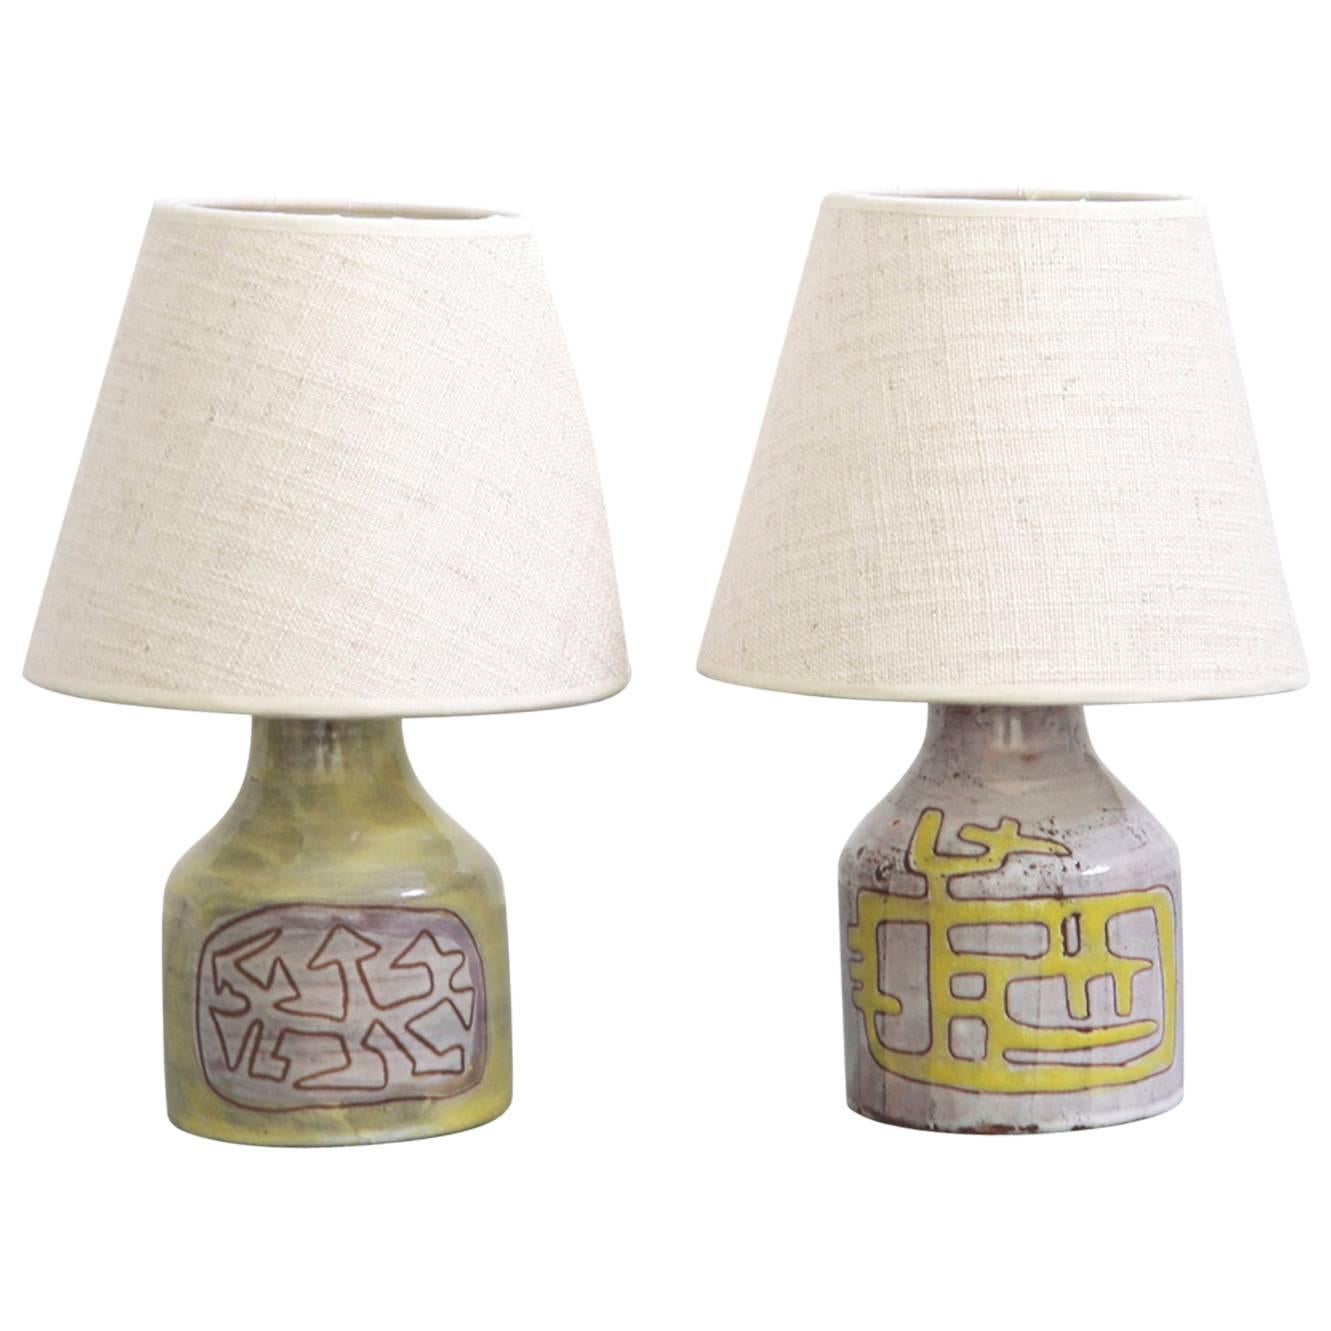 Pair of Ceramic Table Lamps by Juliene Derel Rivier